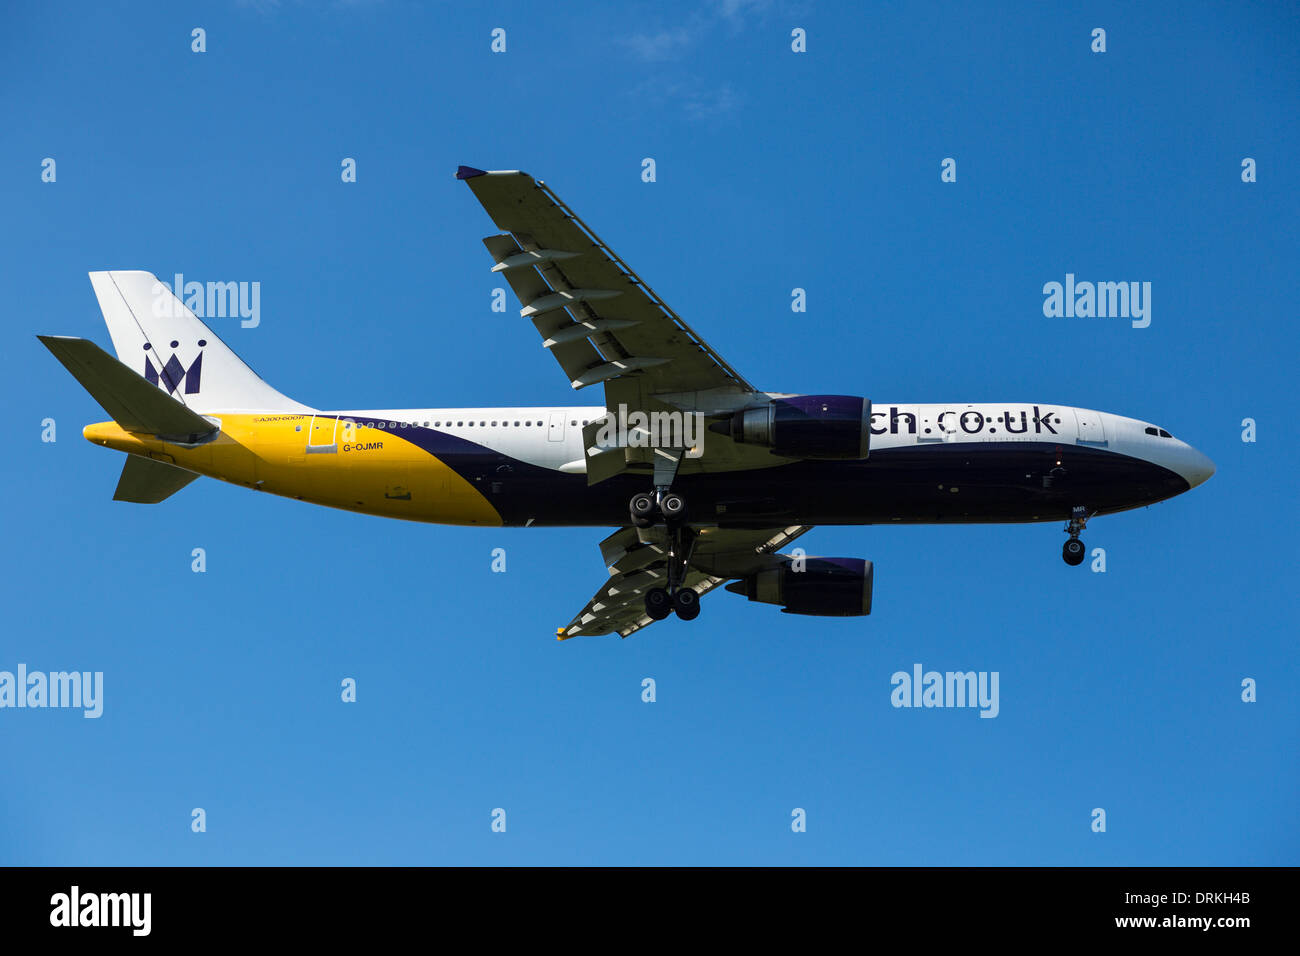 Monarch airbus A300 to land Stock Photo